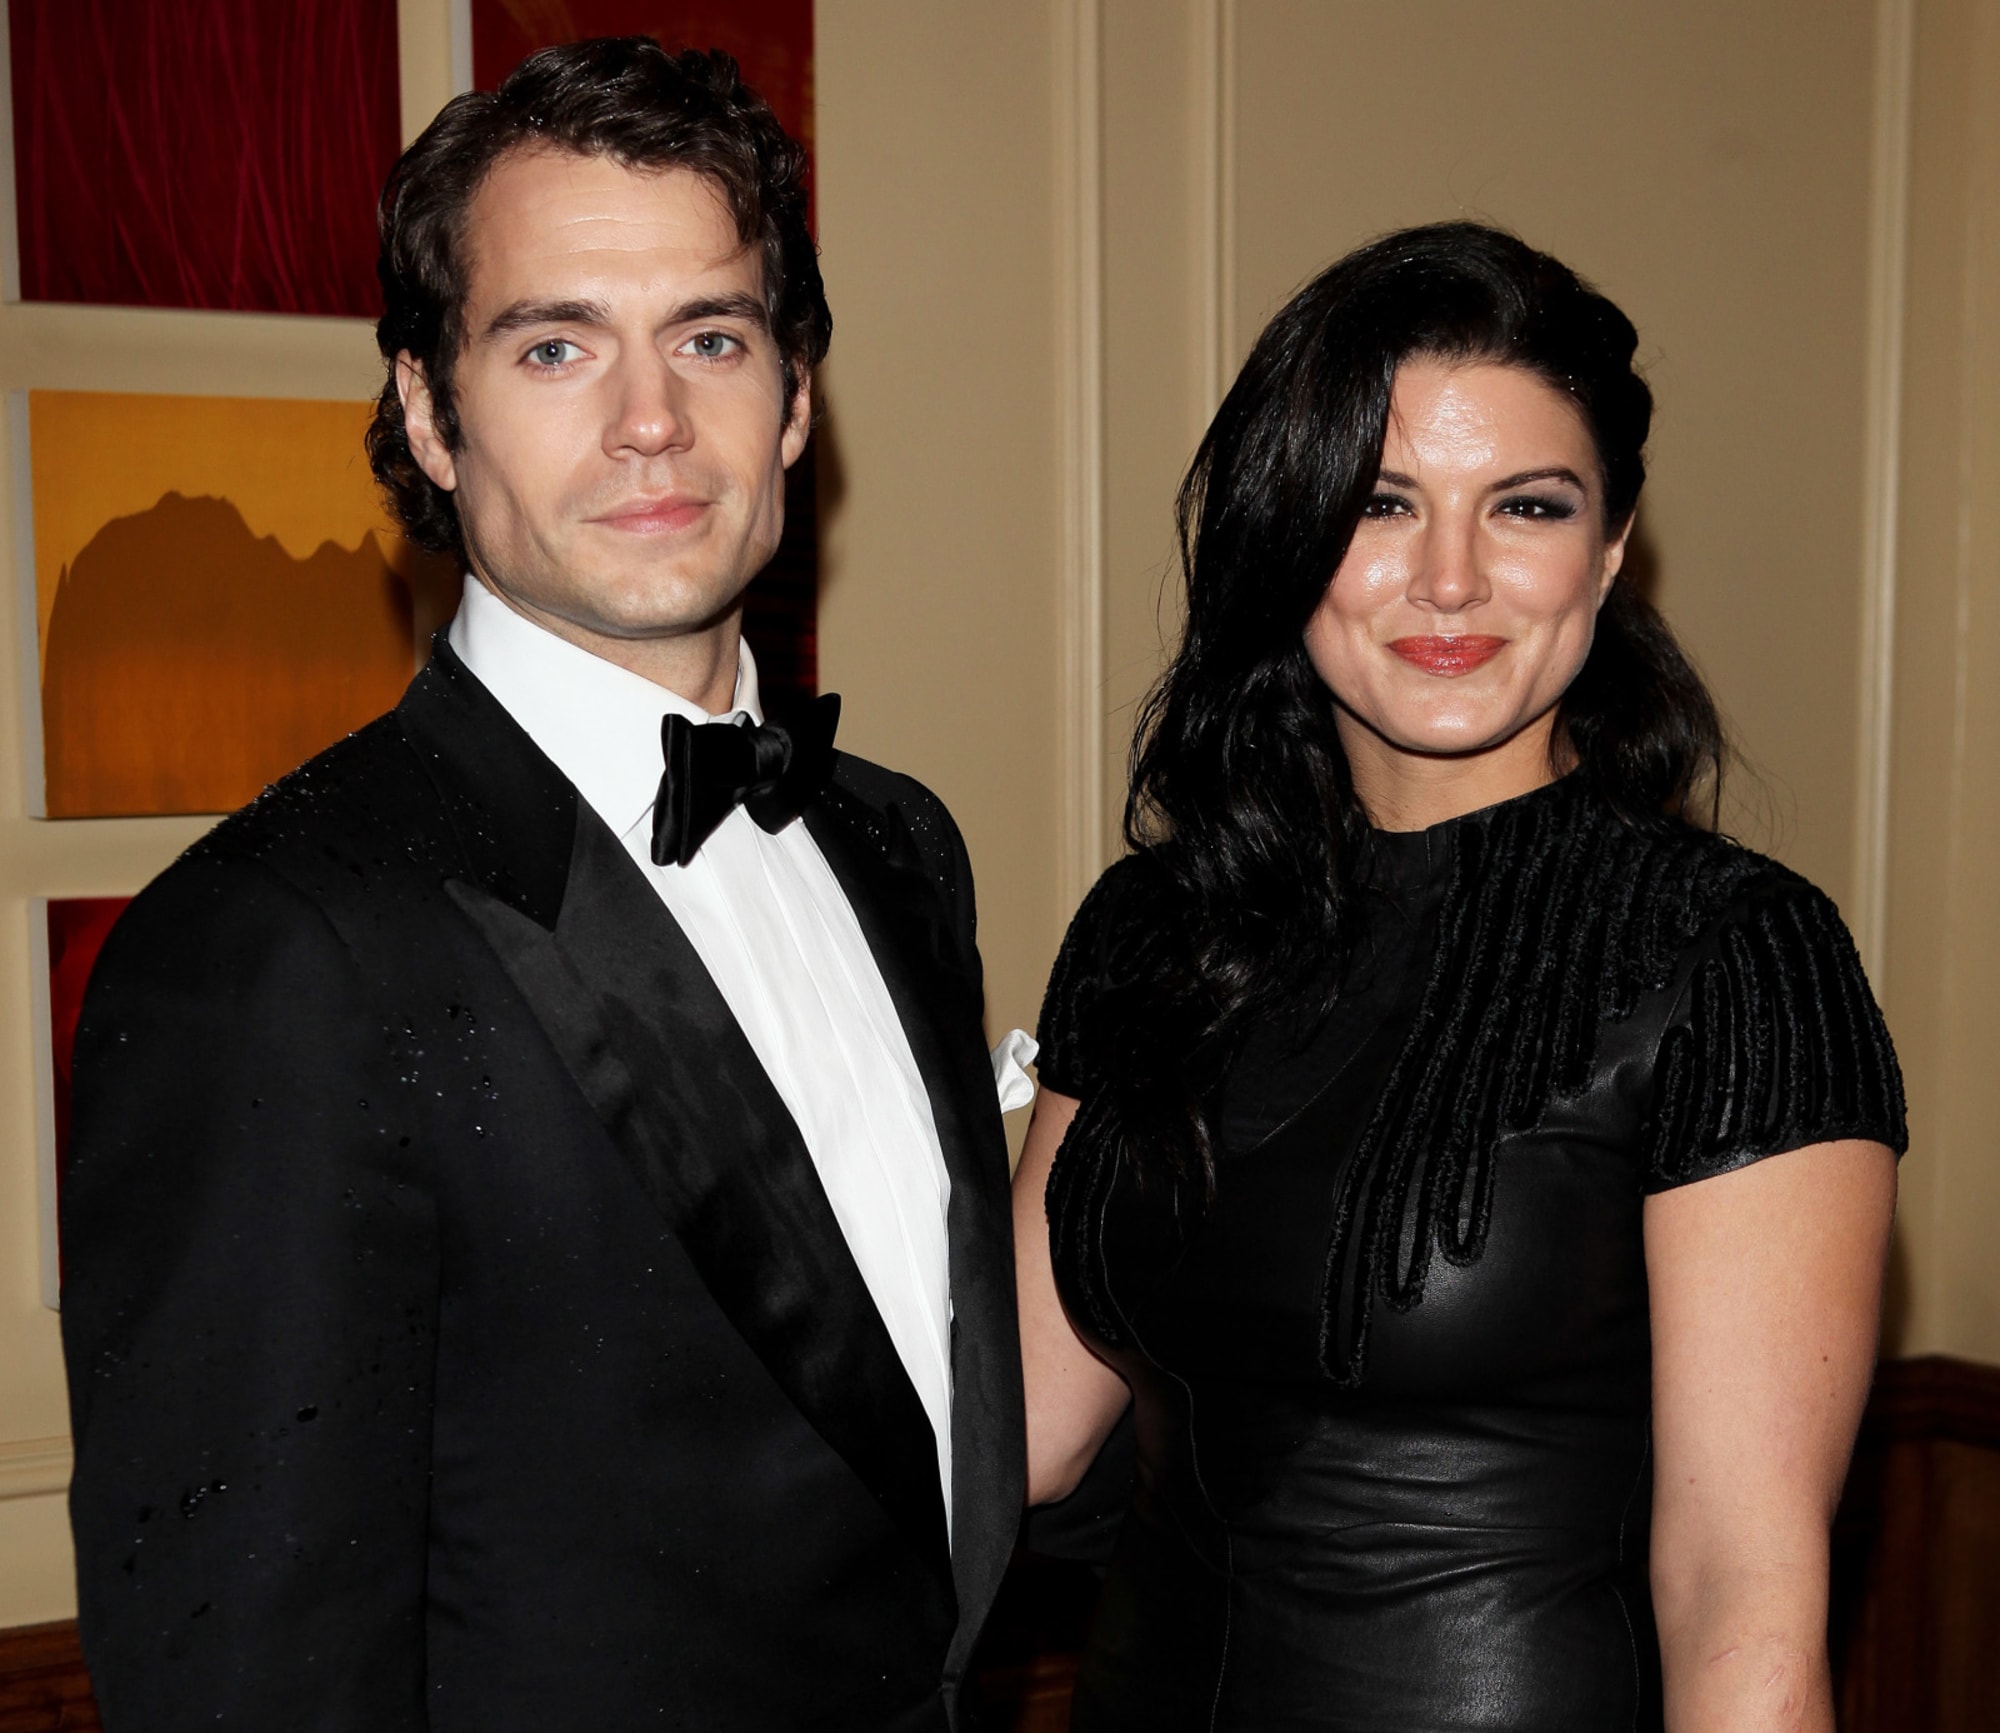 Henry Cavill fans are shocked to find out he once dated Gina Carano